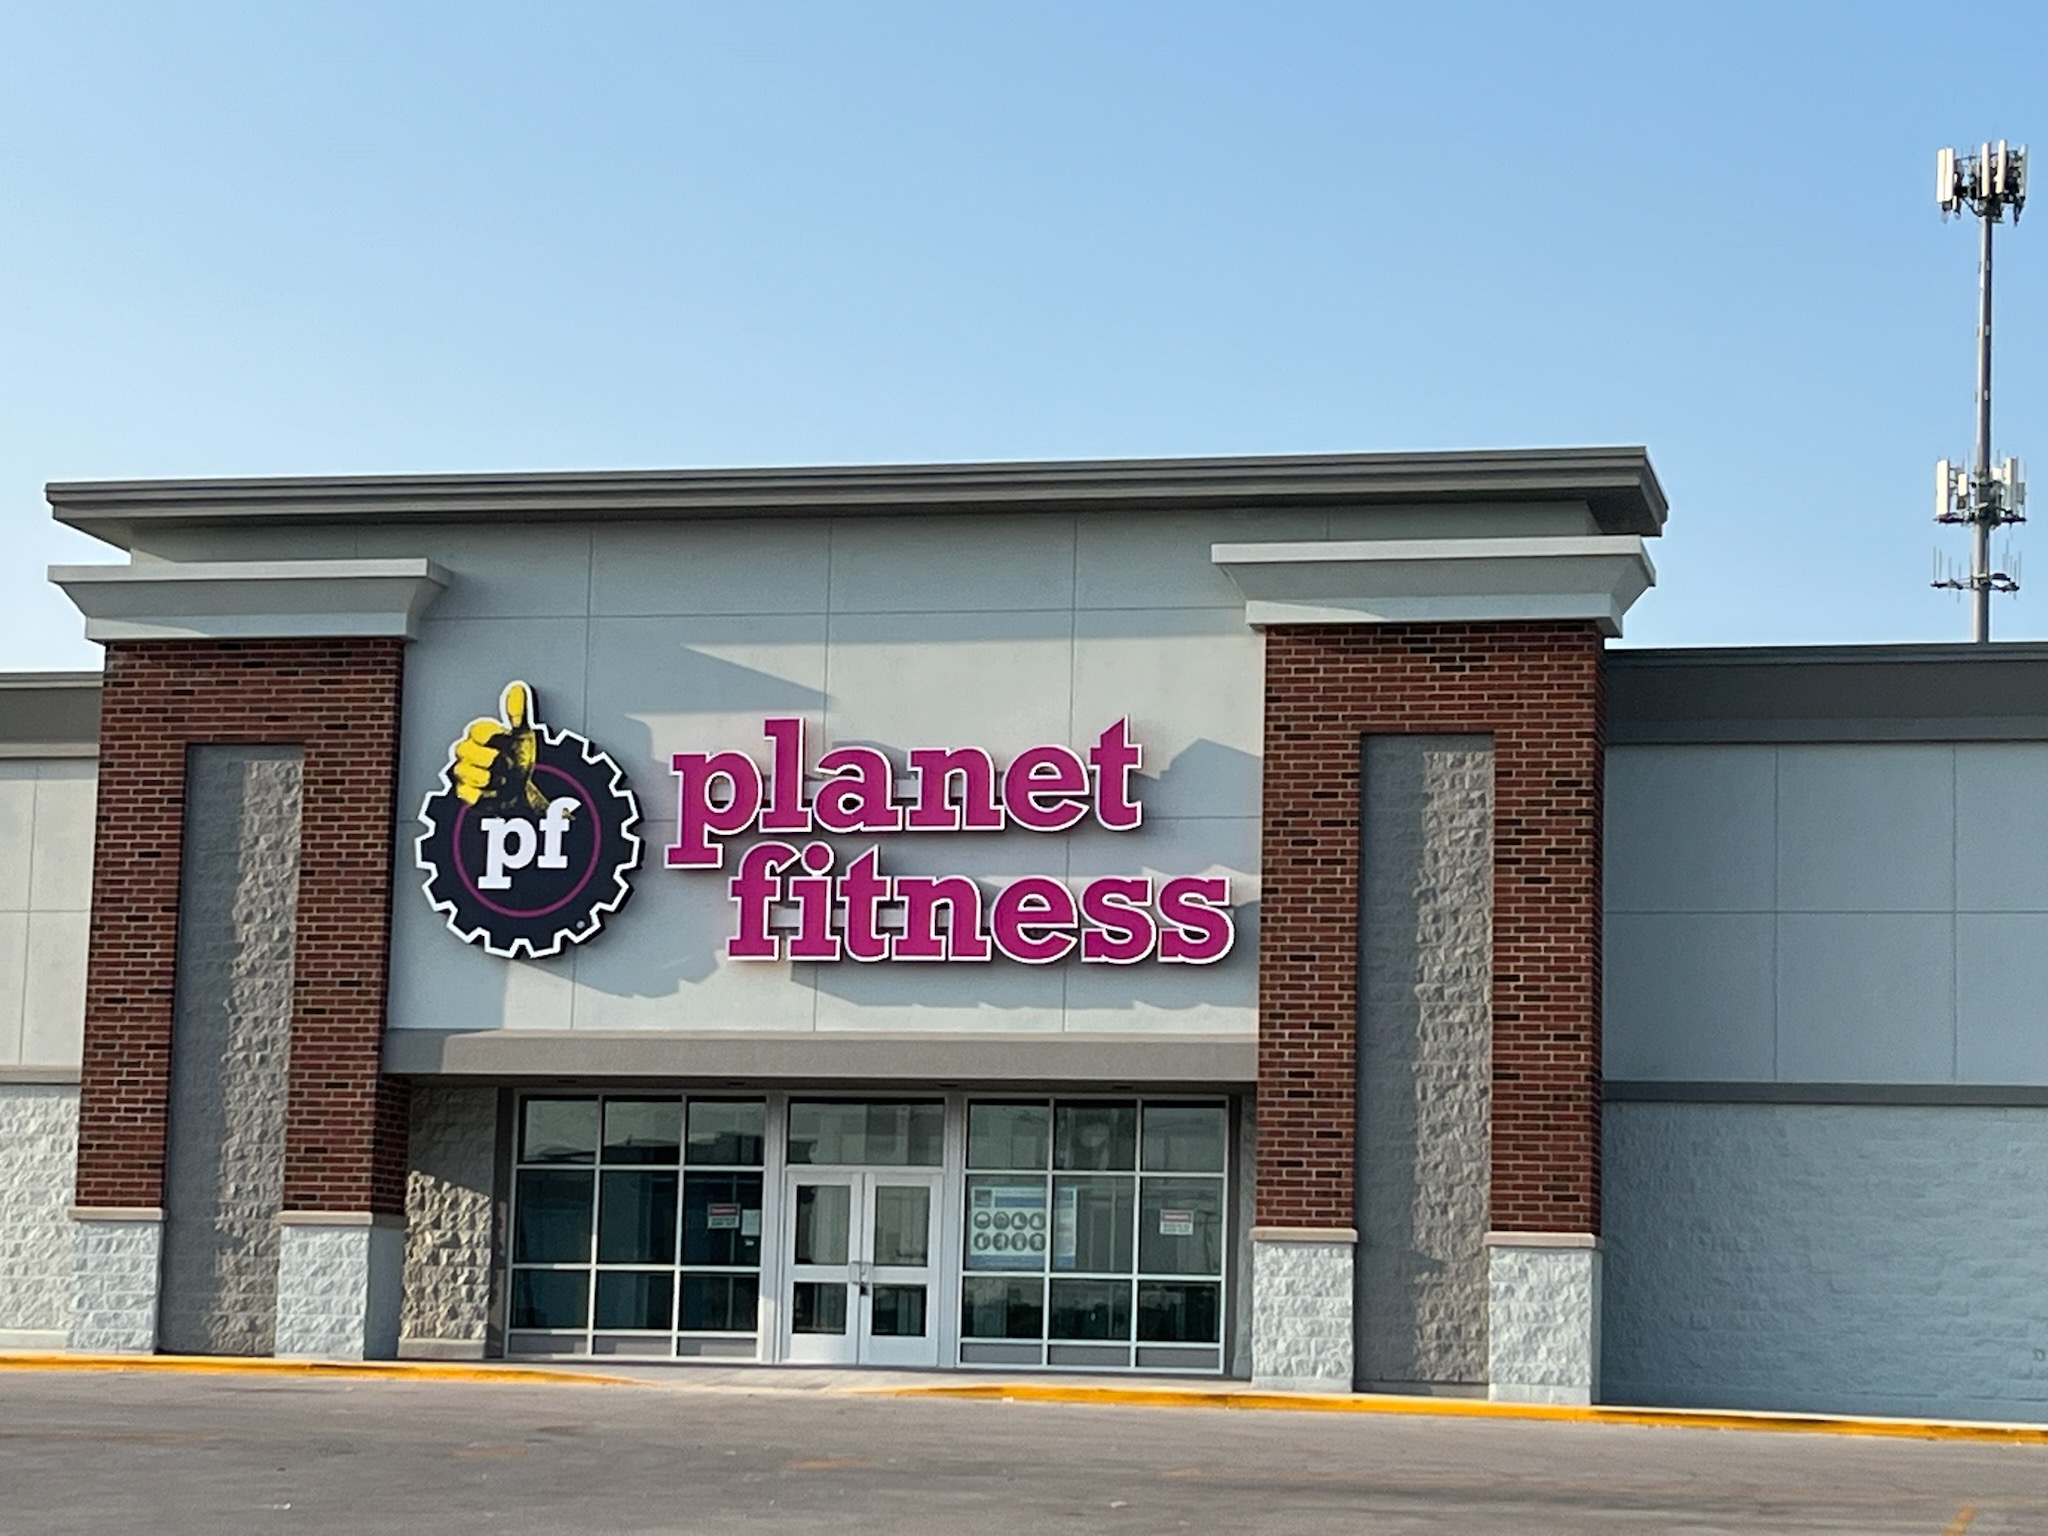 Quincy welcomes Planet Fitness to boost economic activity